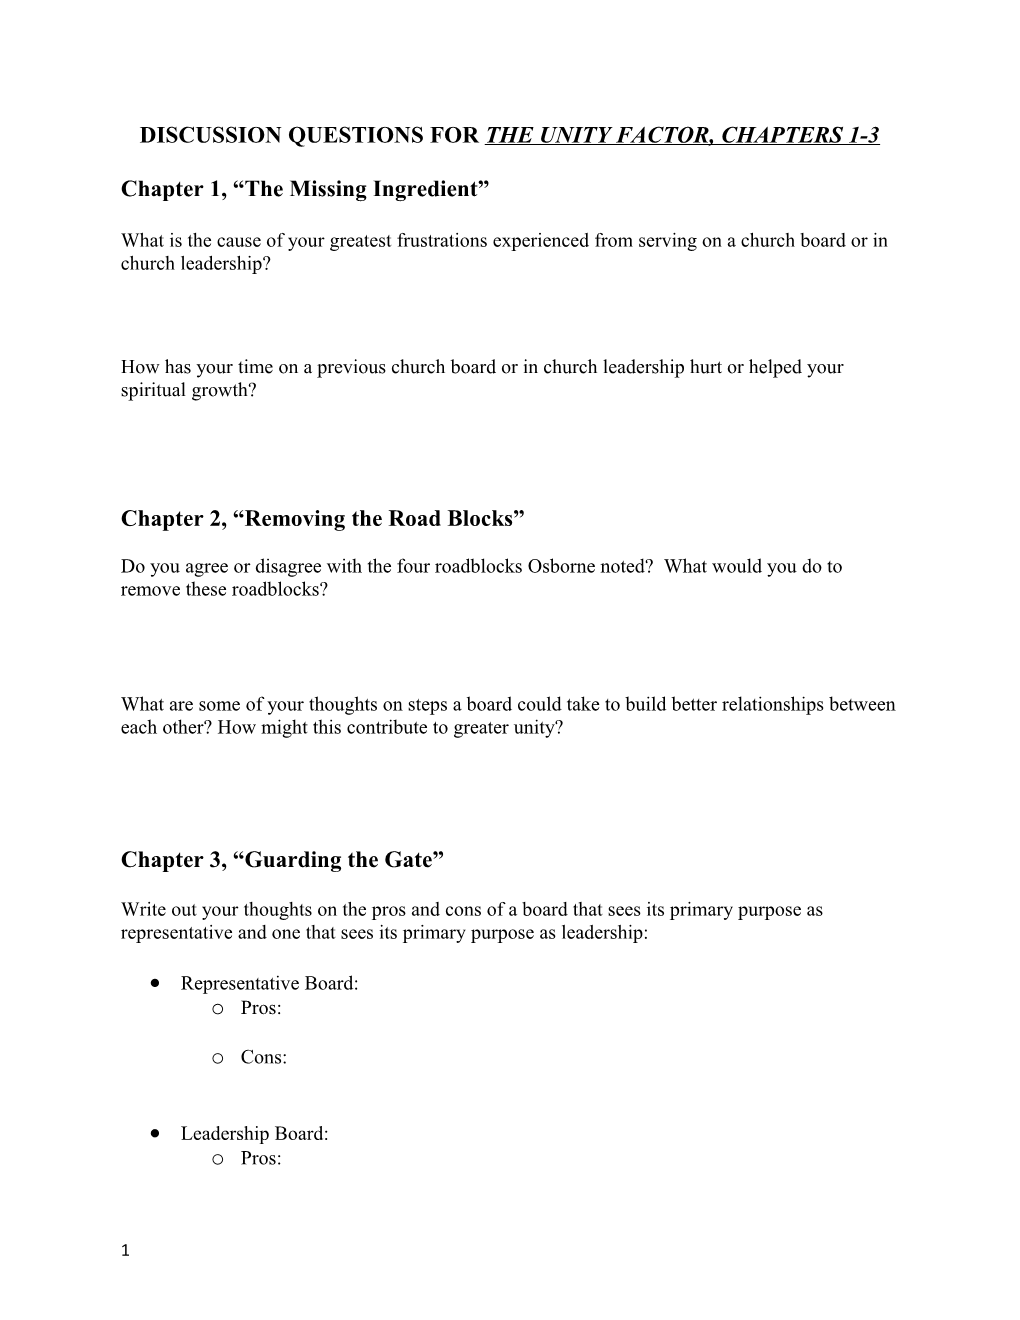 Discussion Questions for the Unity Factor, Chapters 1-3